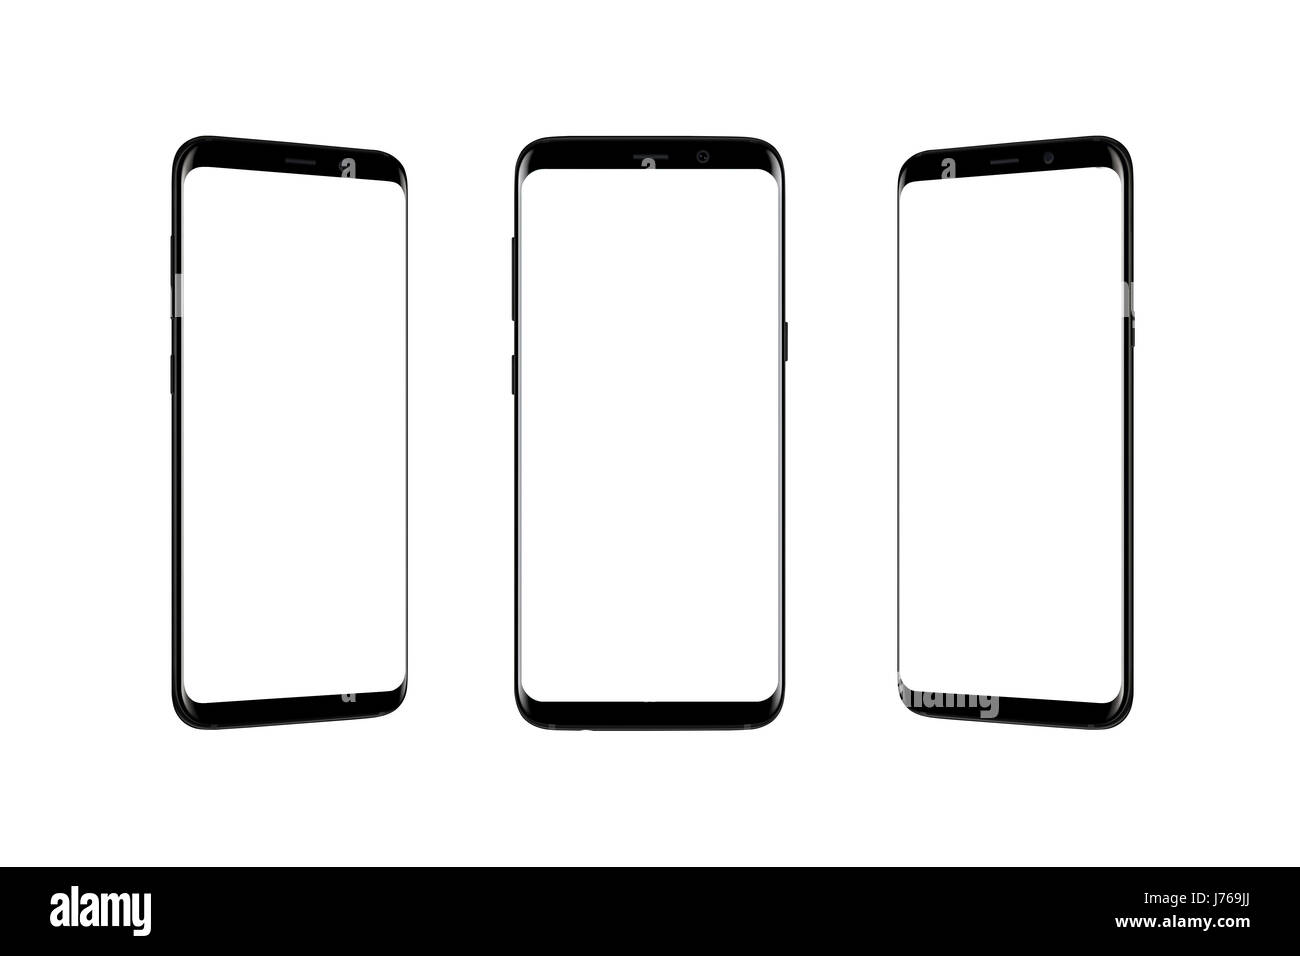 Isolated smart phone in three position. Modern black mobile with thin rounded edges. Stock Photo